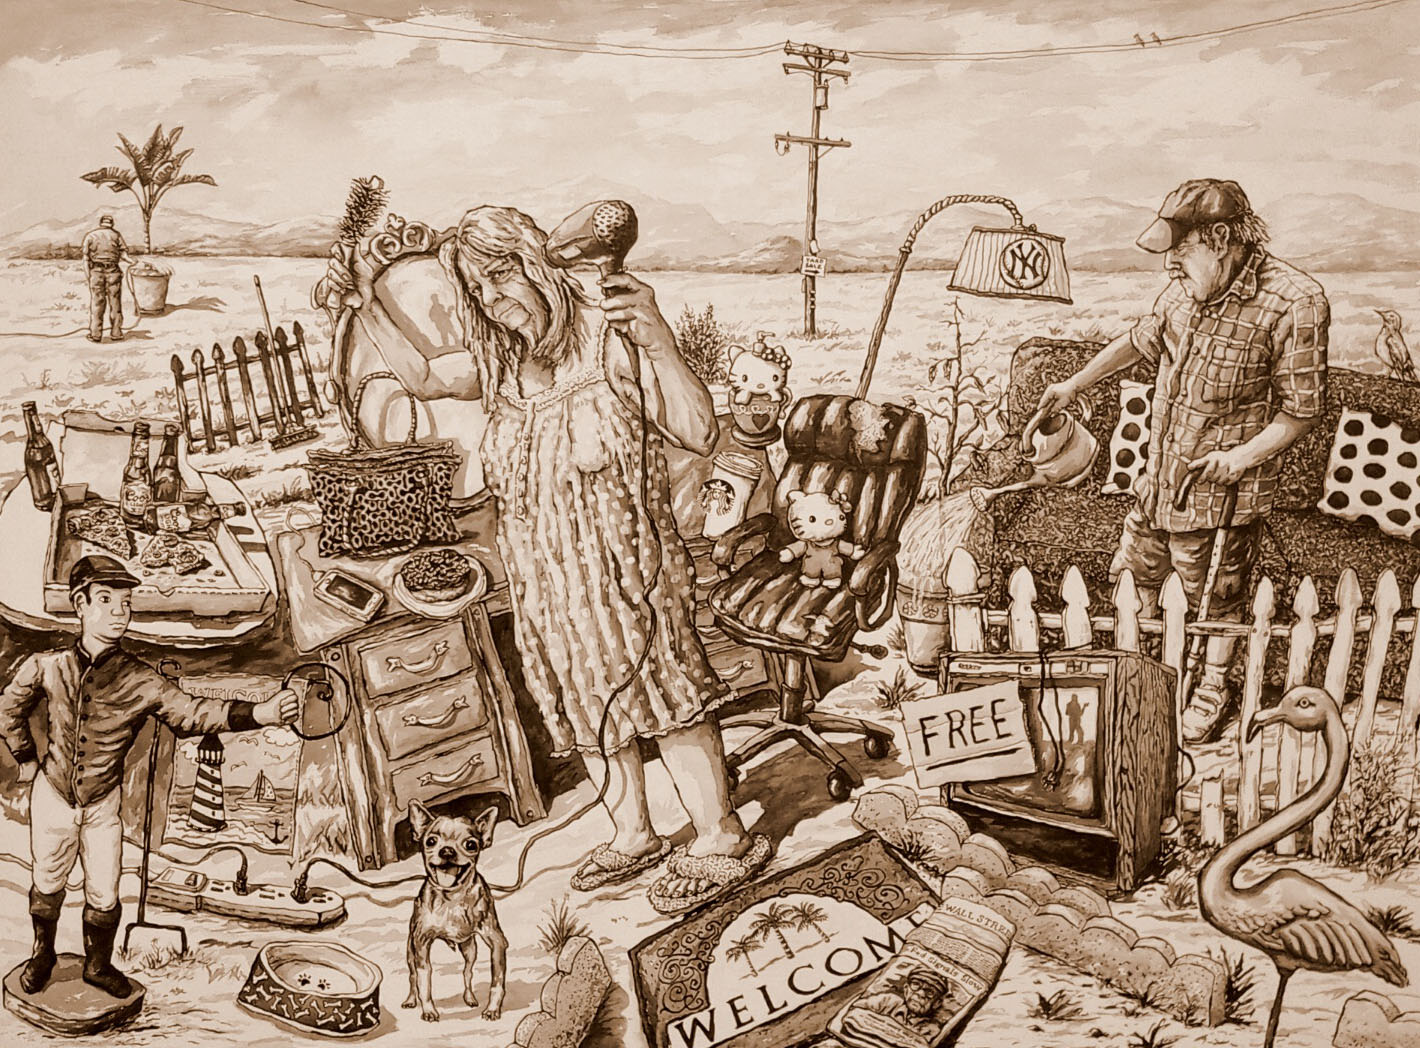 A sepia toned image, features two individuals surrounded by an assortment of items like chairs, a free broken TV, empty beer bottles, and pizza, 